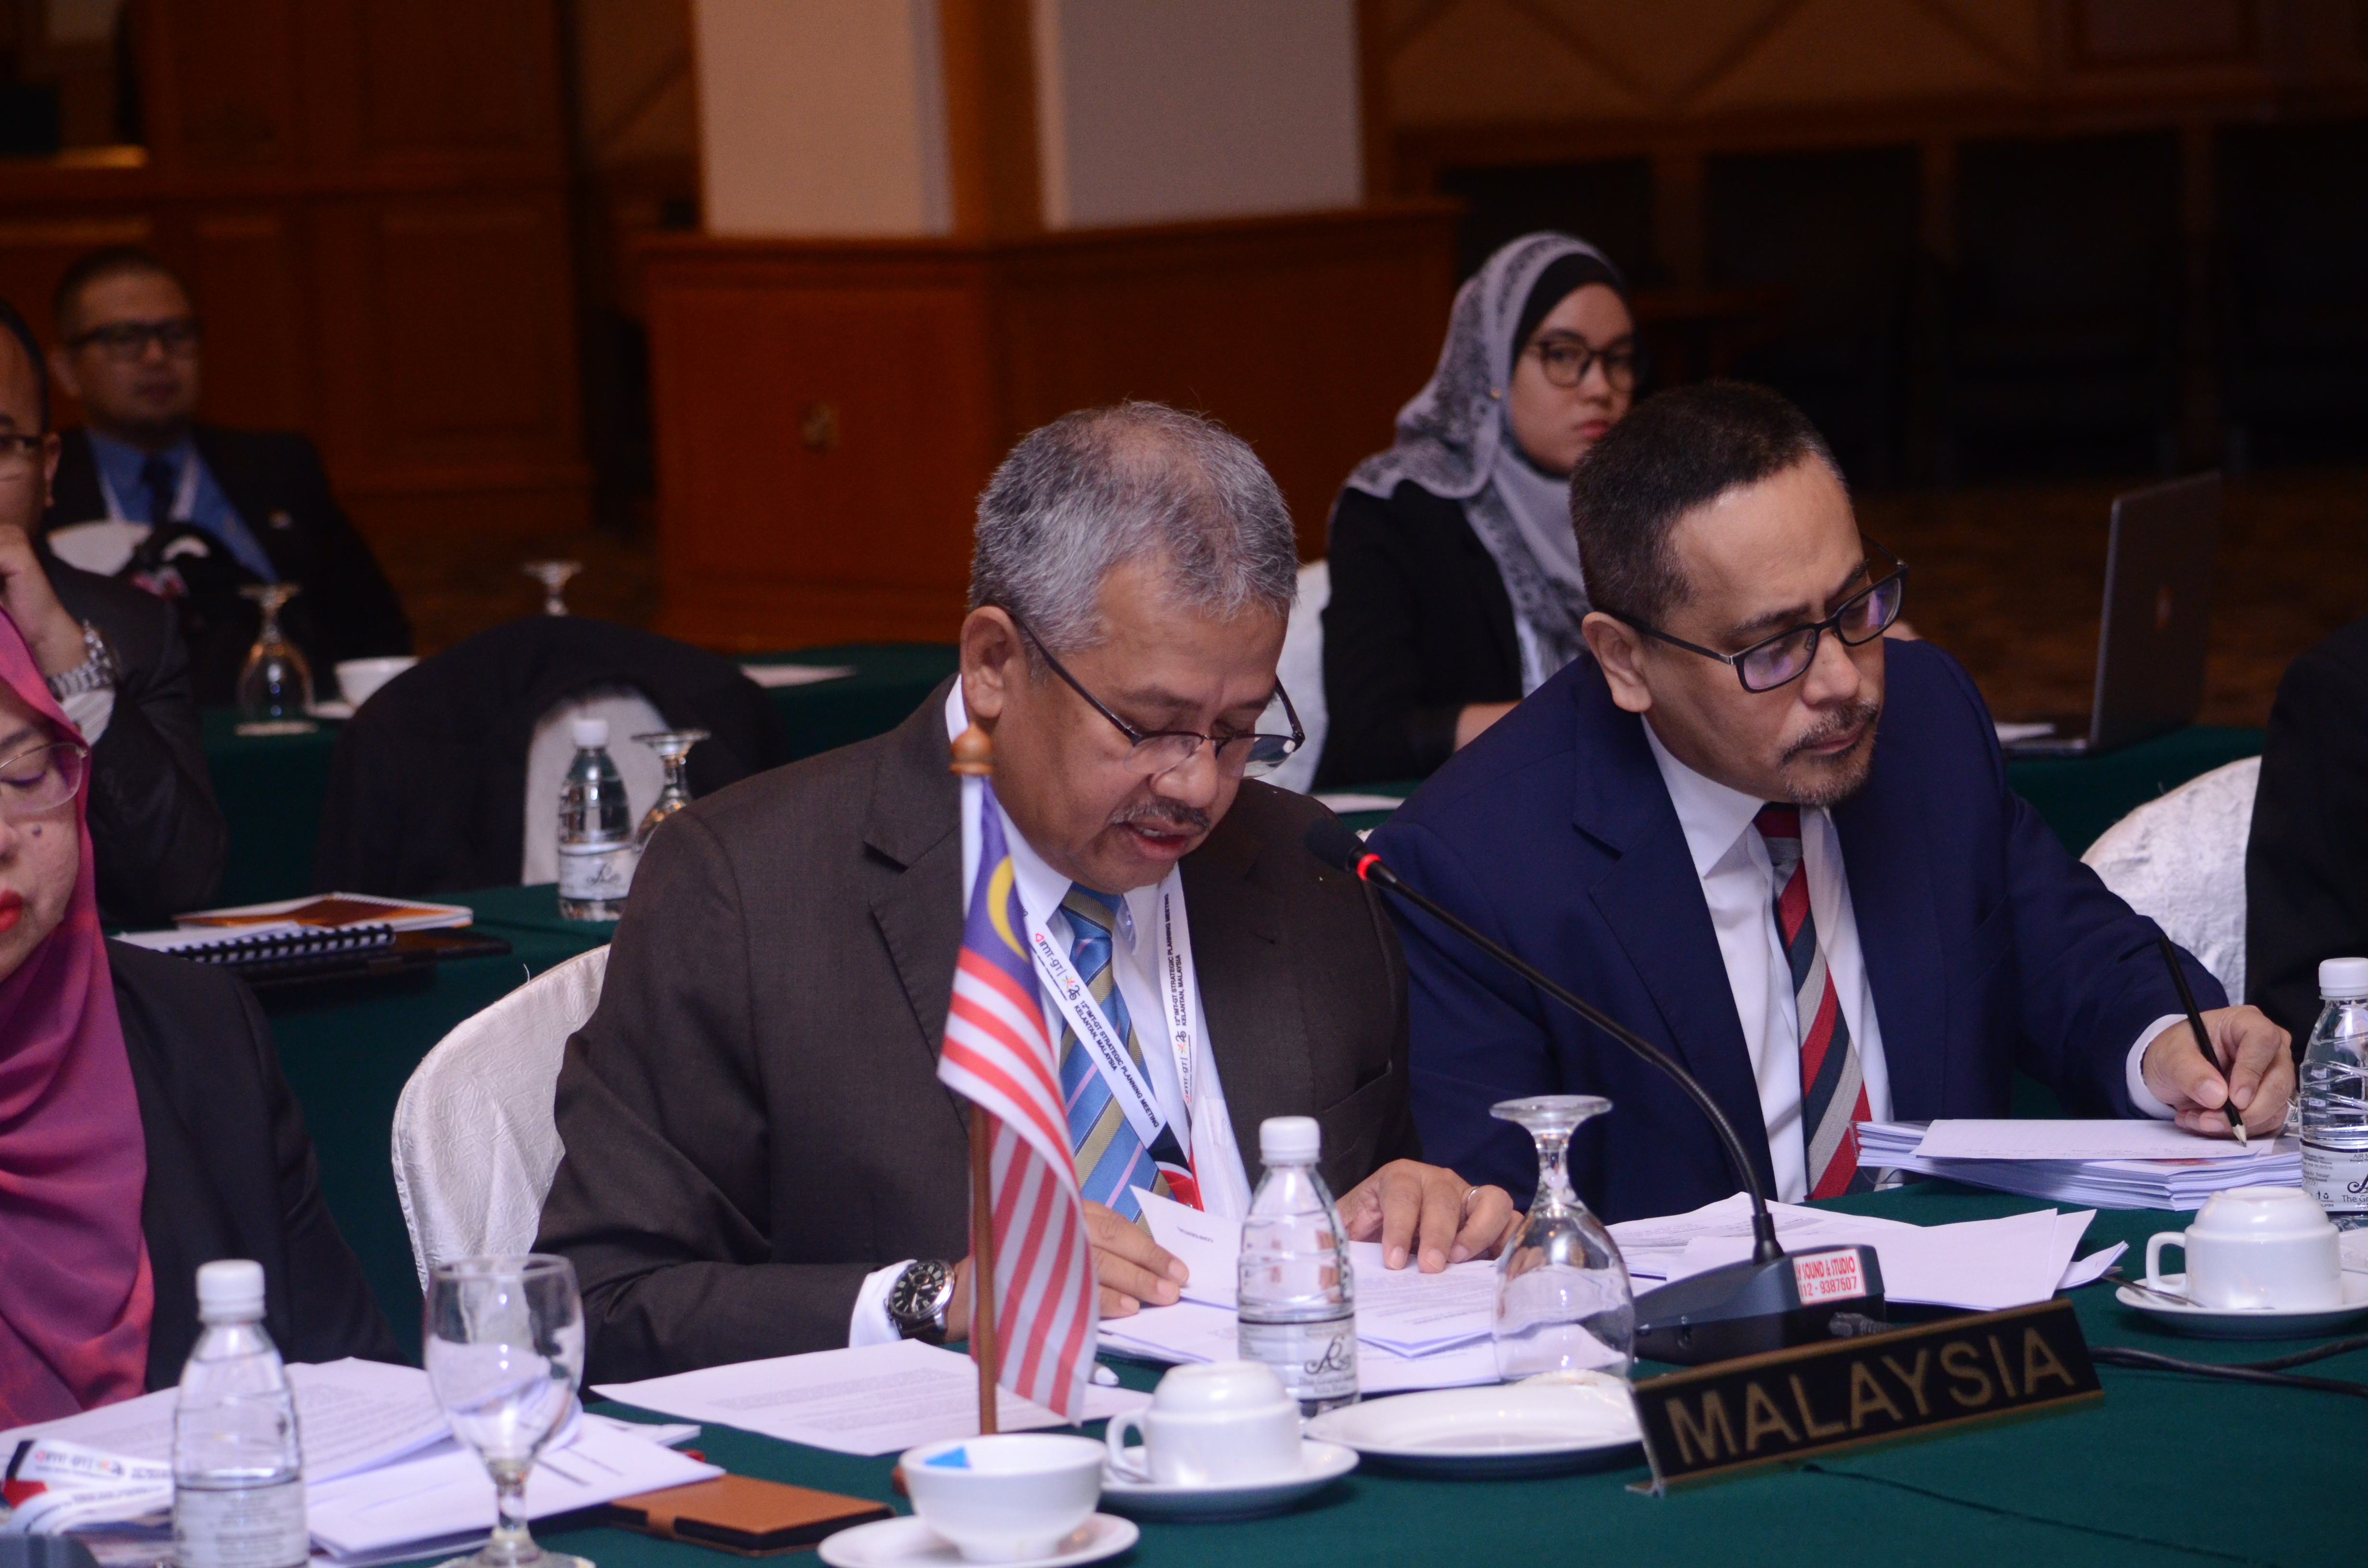 Read more about the article Kelantan hosted the 12th IMT-GT Strategic Planning Meeting on March 2019.